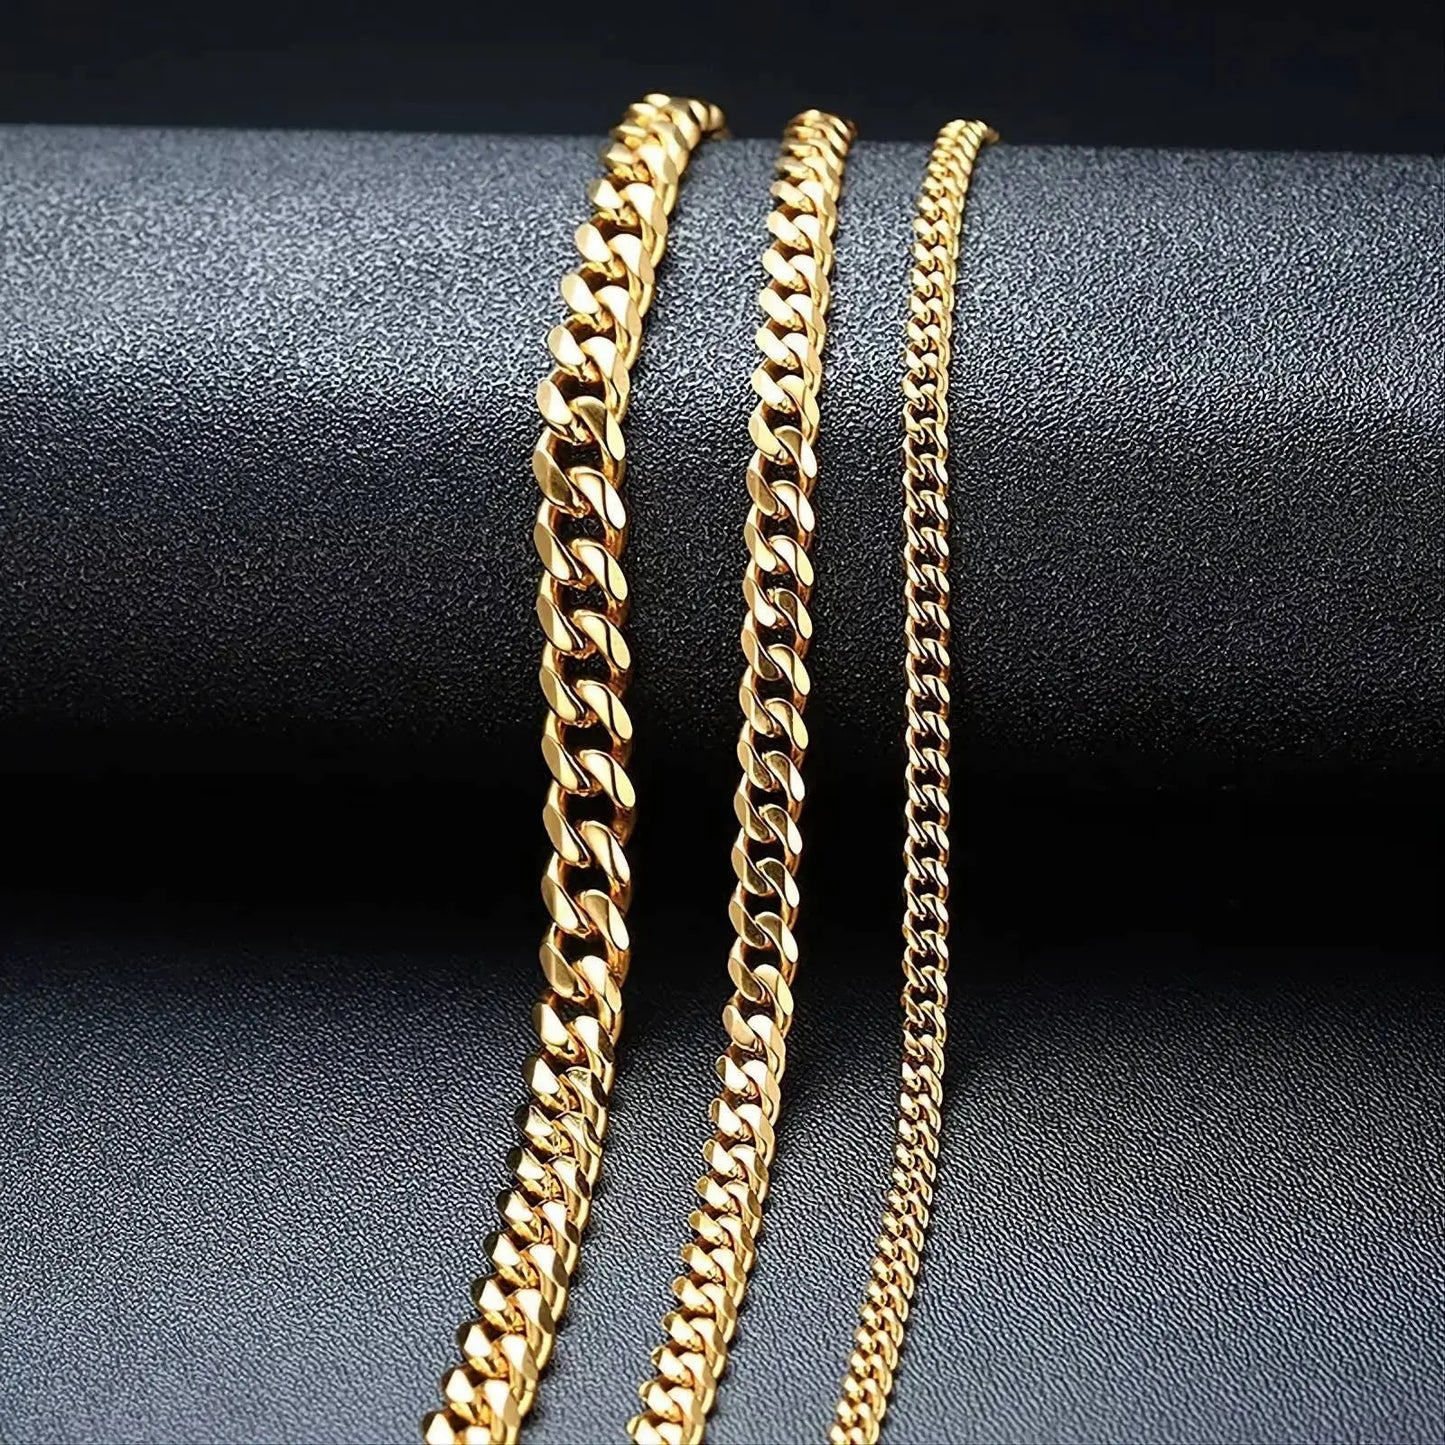 14k Gold Cuban Link Necklace, 3mm/5mm/7mm/9mm/11mm Mens Gift, Gift for Dad, Wife Husband, Stainless Steel Necklace, Gold Necklace JettsJewelers